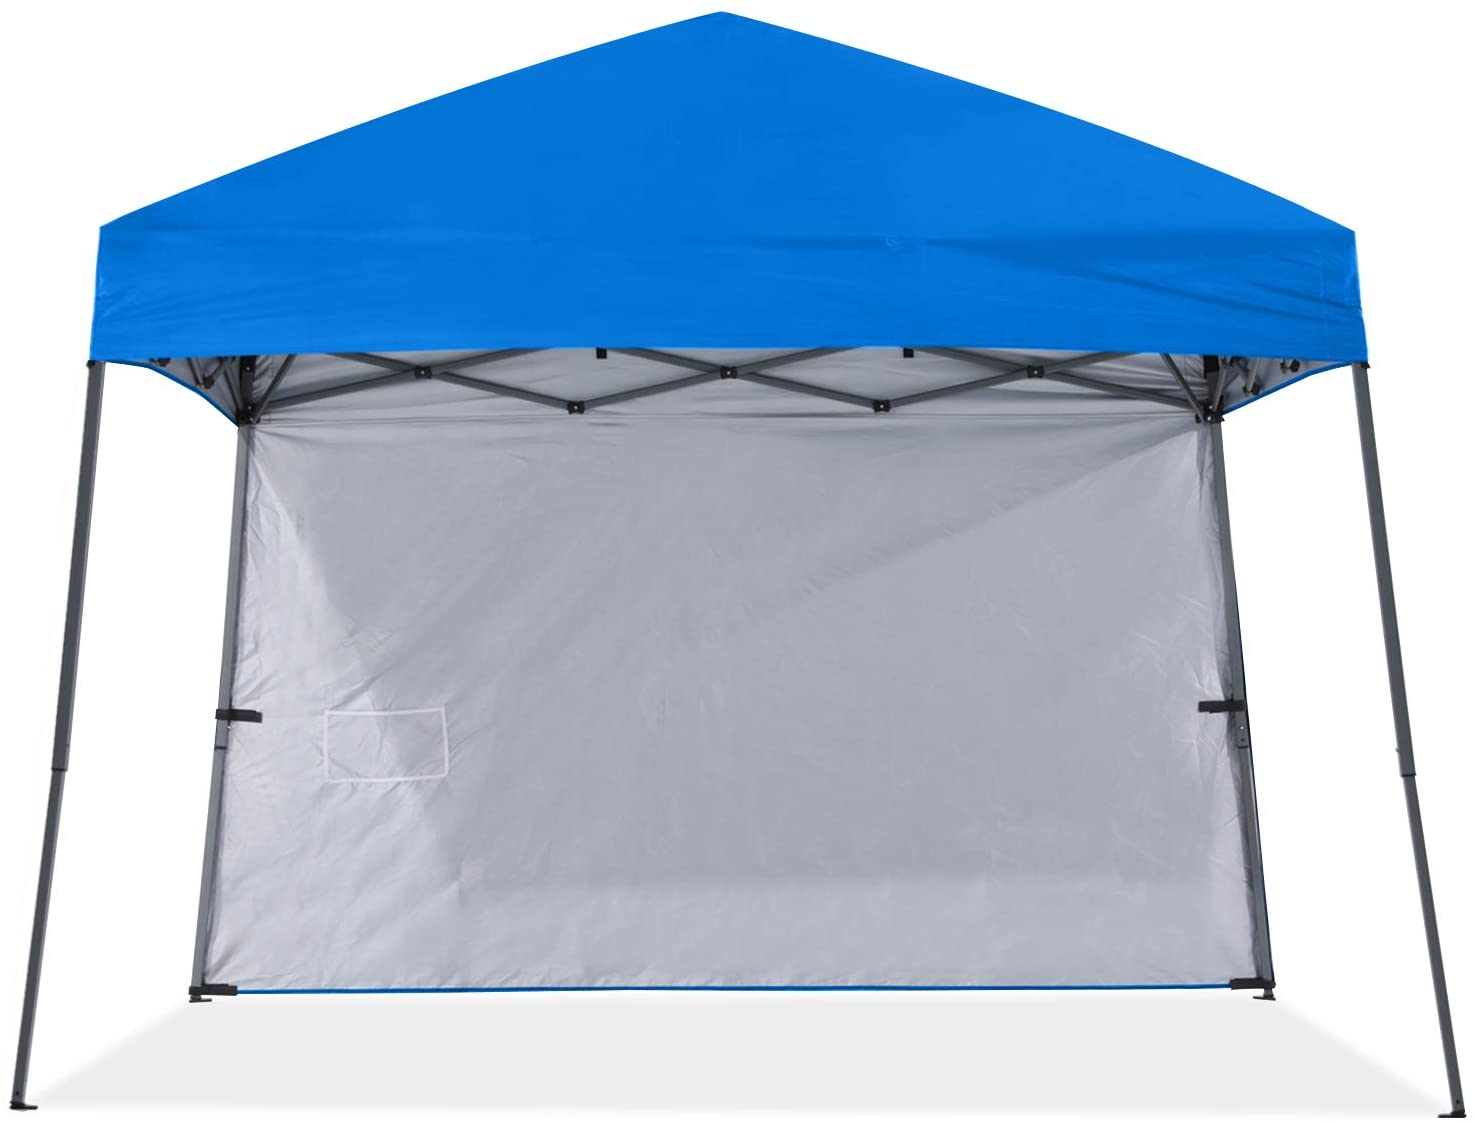 Outdoor Beach Camping Canopy with 1 Sun Wall ( 8x8 Ft / 10x10 Ft ) - ABC-CANOPY